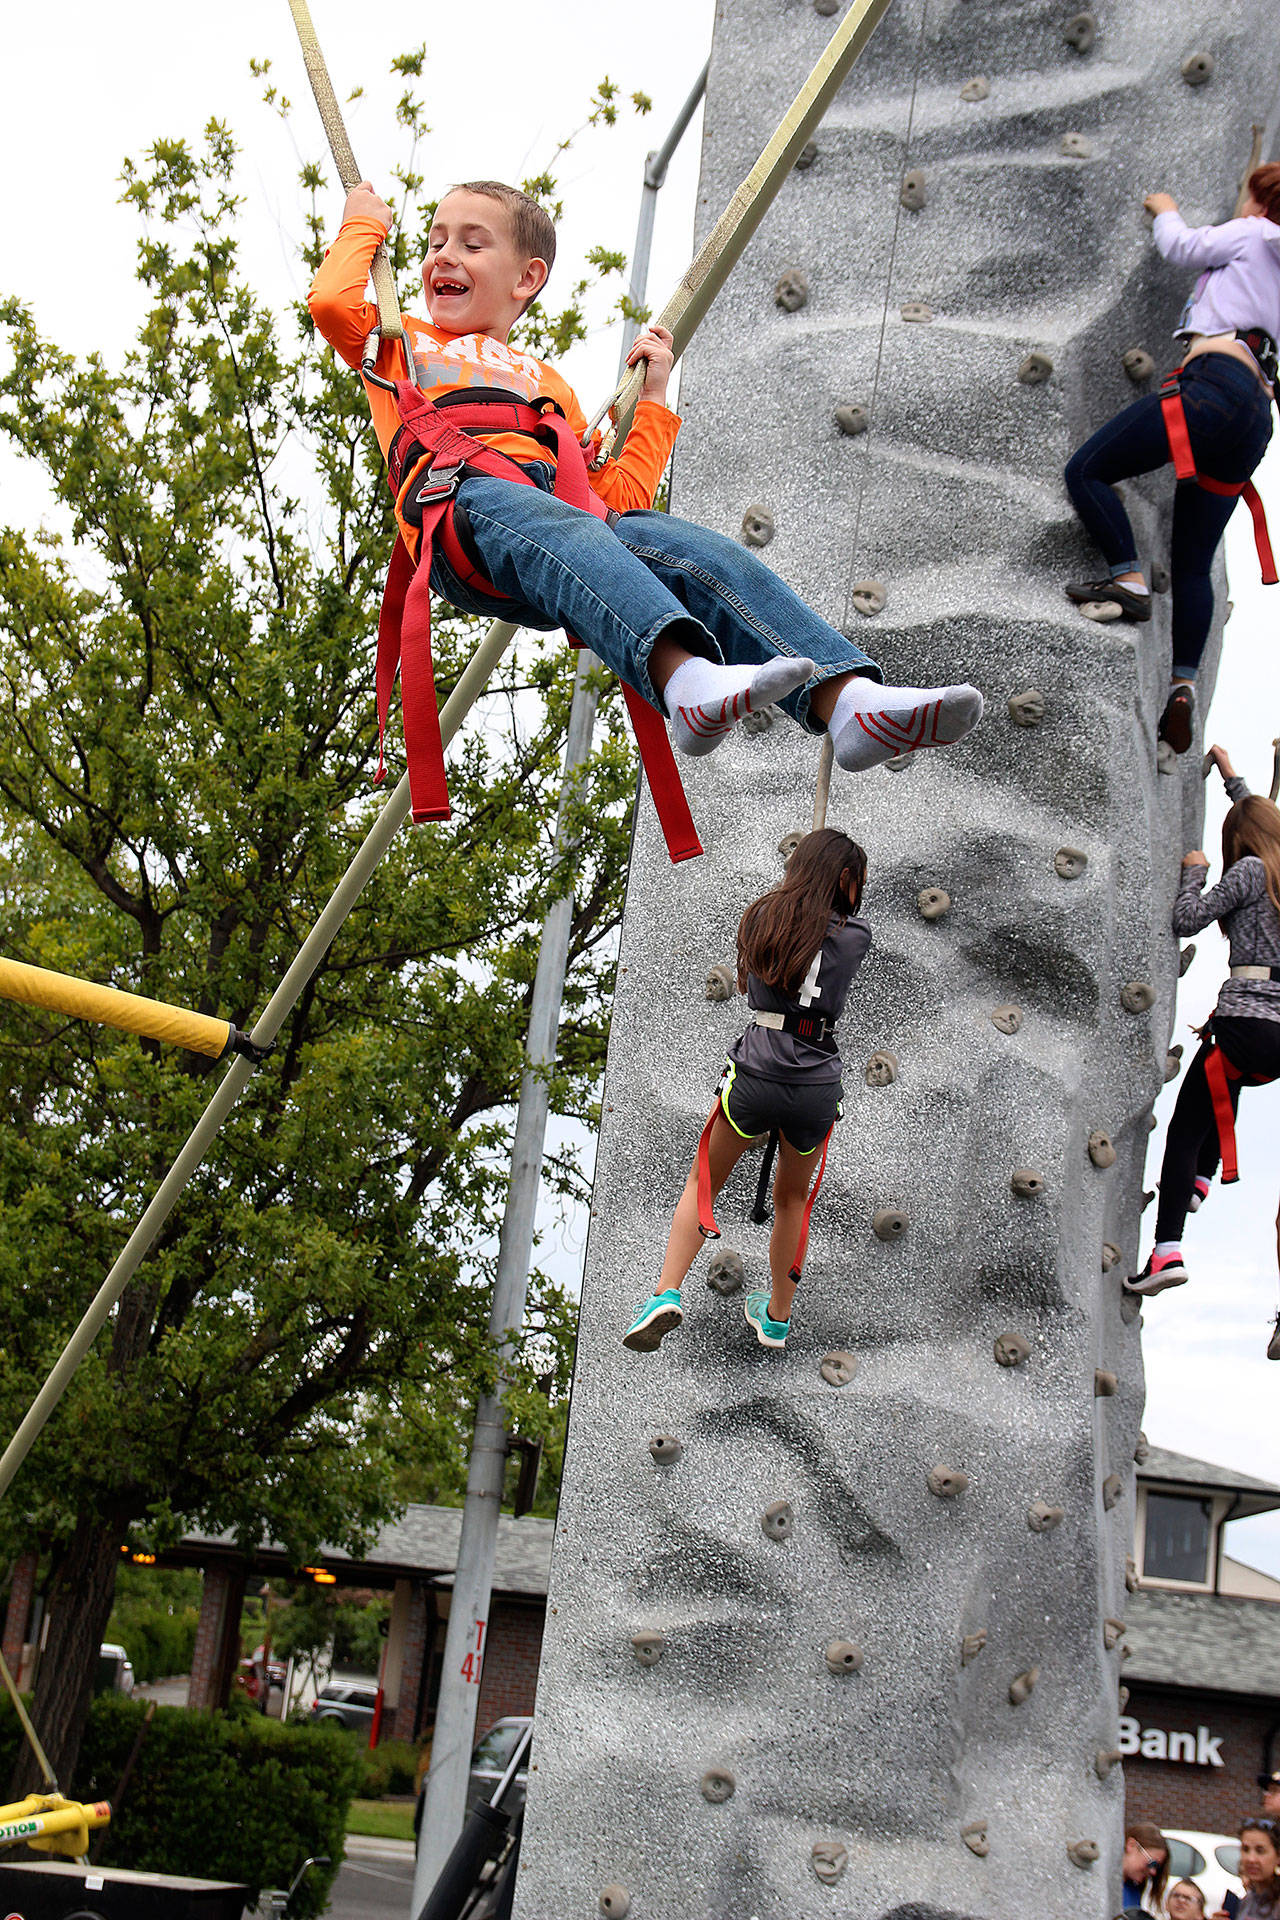 Aidan Wawro, 7, jumps from a trampoline and is hoisted by bunjee cords Sunday afternoon at Oak Harbor’s annual Pigfest. (Photos by Laura Guido/Whidbey News-Times)